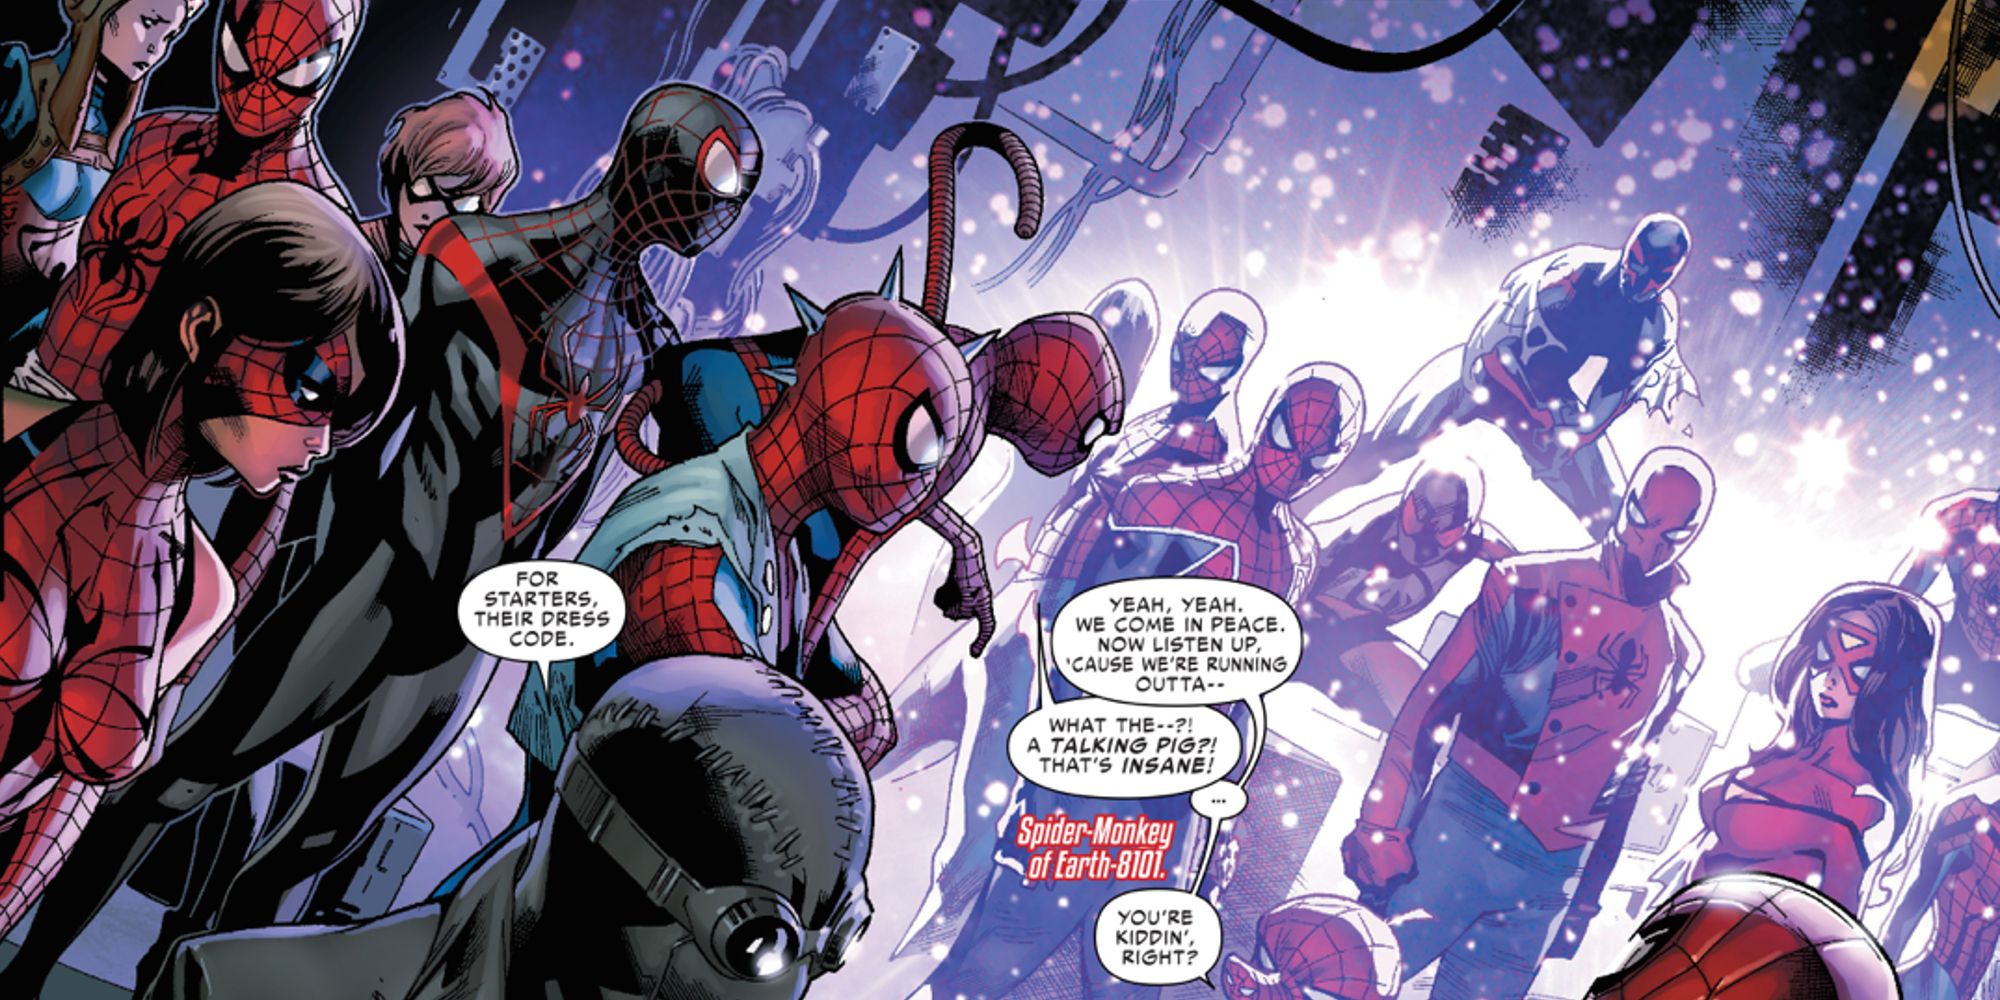 An army of Spider-People together in Marvel Comics' Spider-Verse